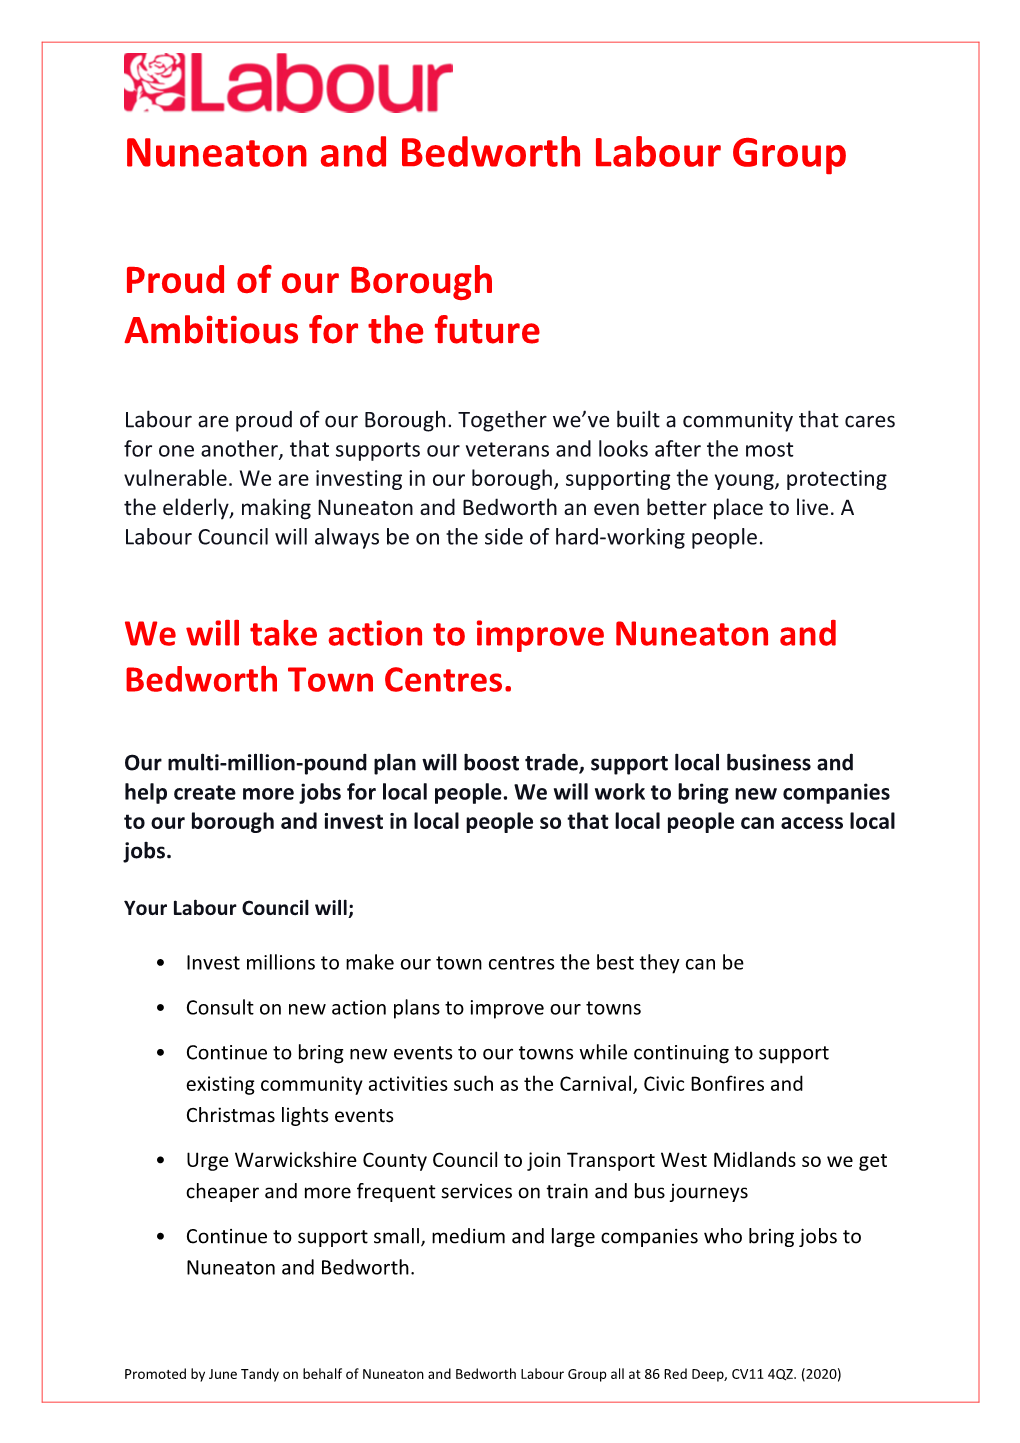 Nuneaton and Bedworth Labour Group